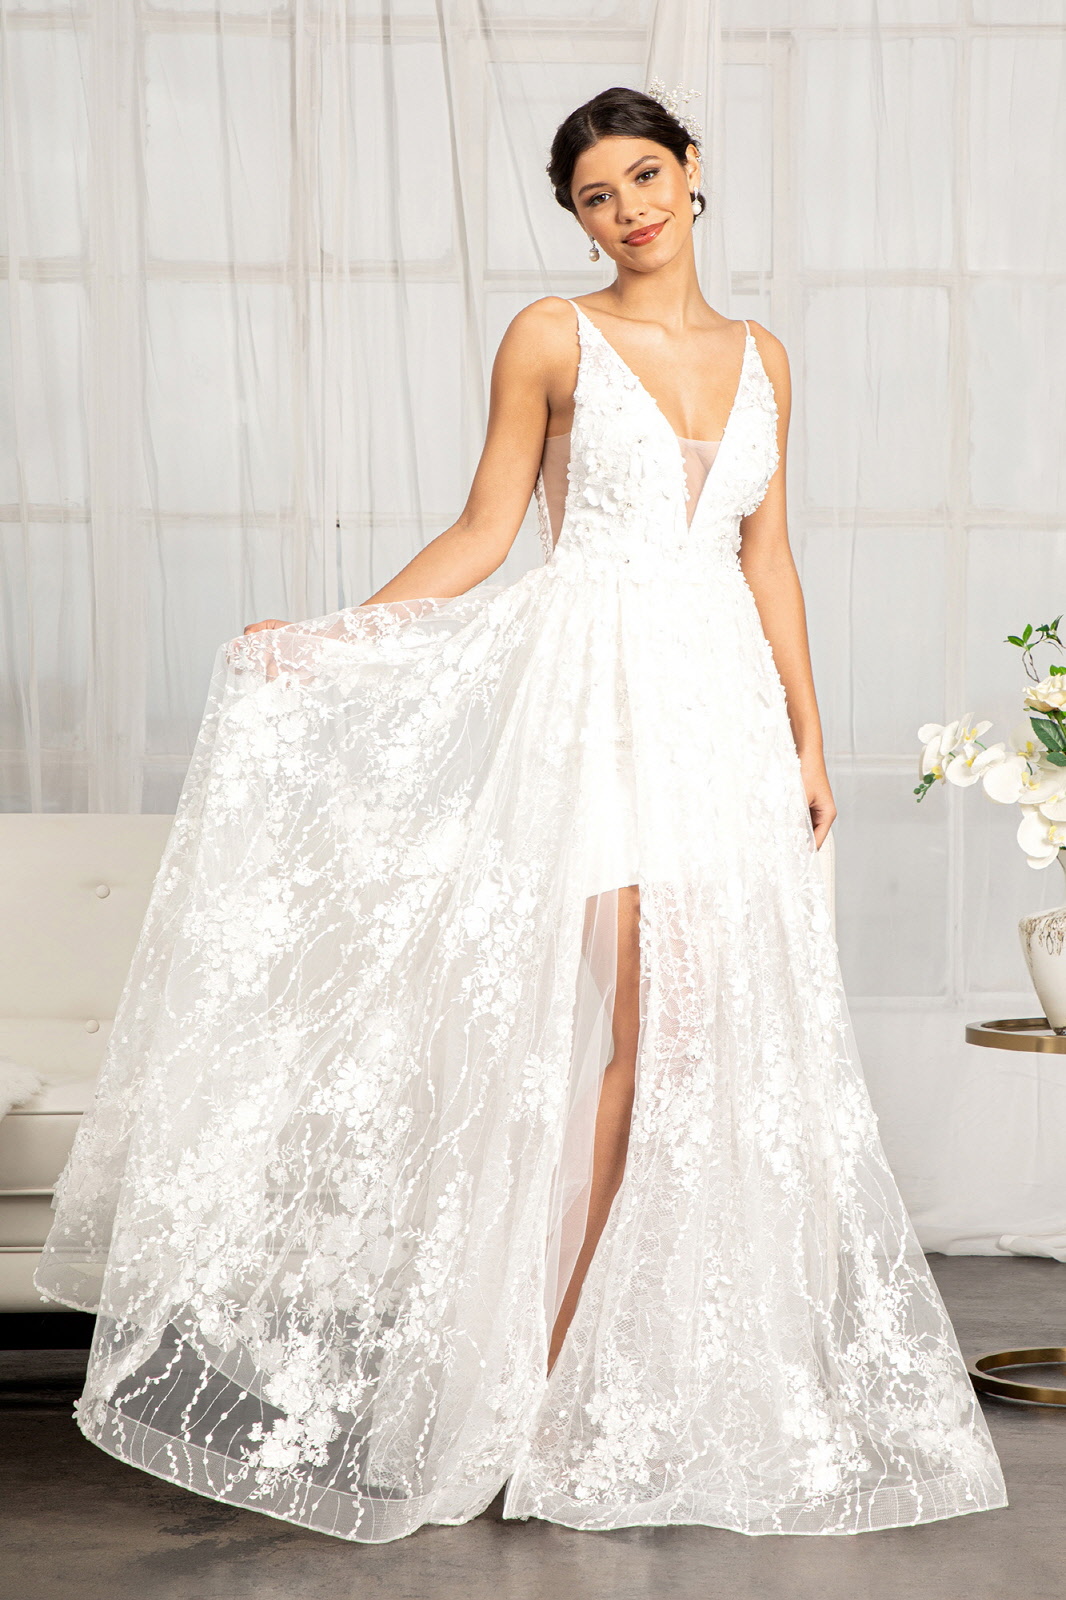 https://glscollective.com/wp-content/uploads/2022/02/gl1984-white-1-long-wedding-gowns-gala-red-carpet-mesh-applique-embroidery-jewel-zipper-spaghetti-strap-v-neck-a-line.jpeg